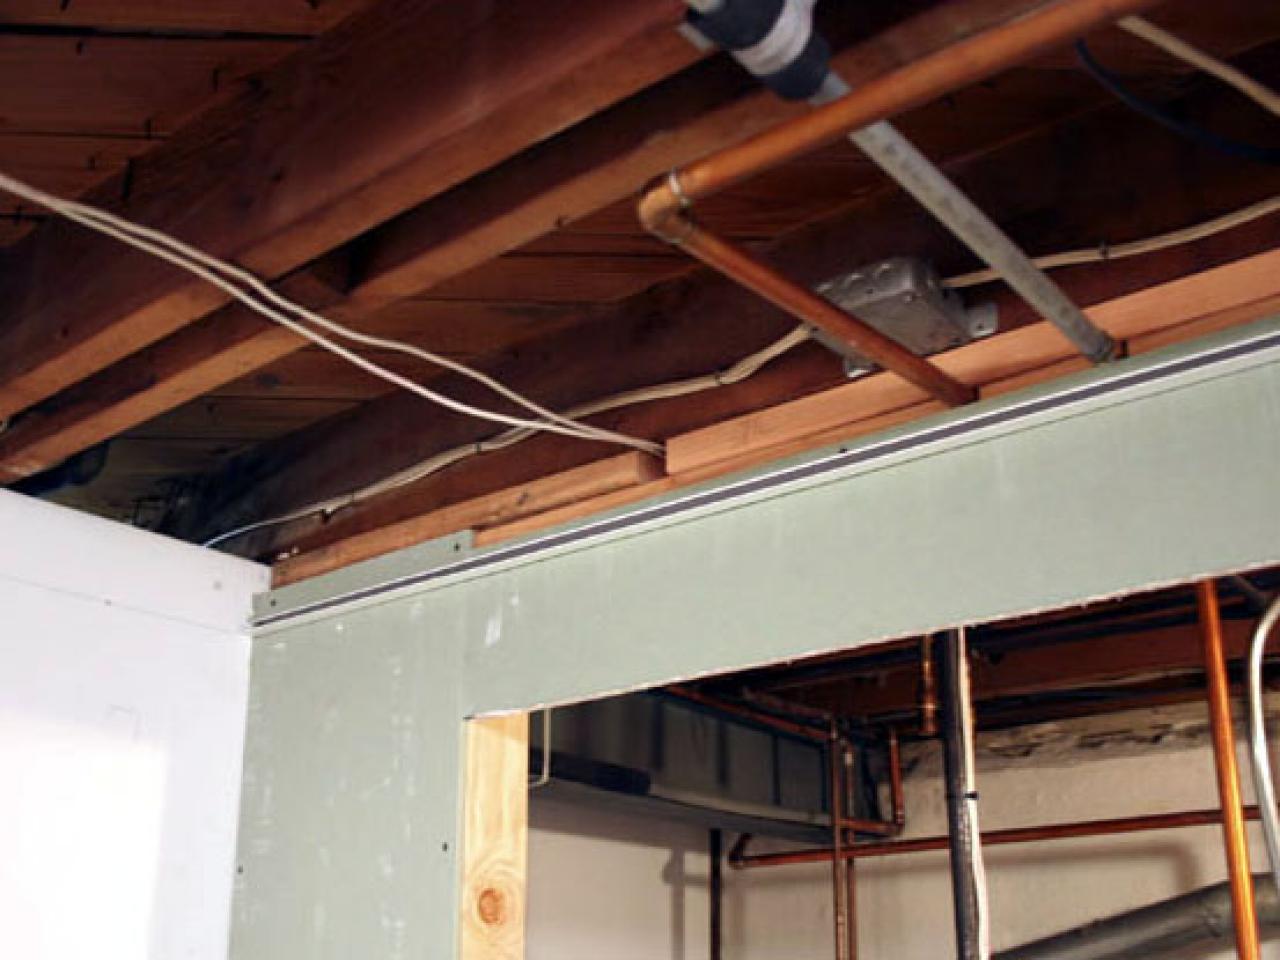 Installing A Drop Ceiling In Basement Laundry - How To Put Ceiling Tiles In Basement